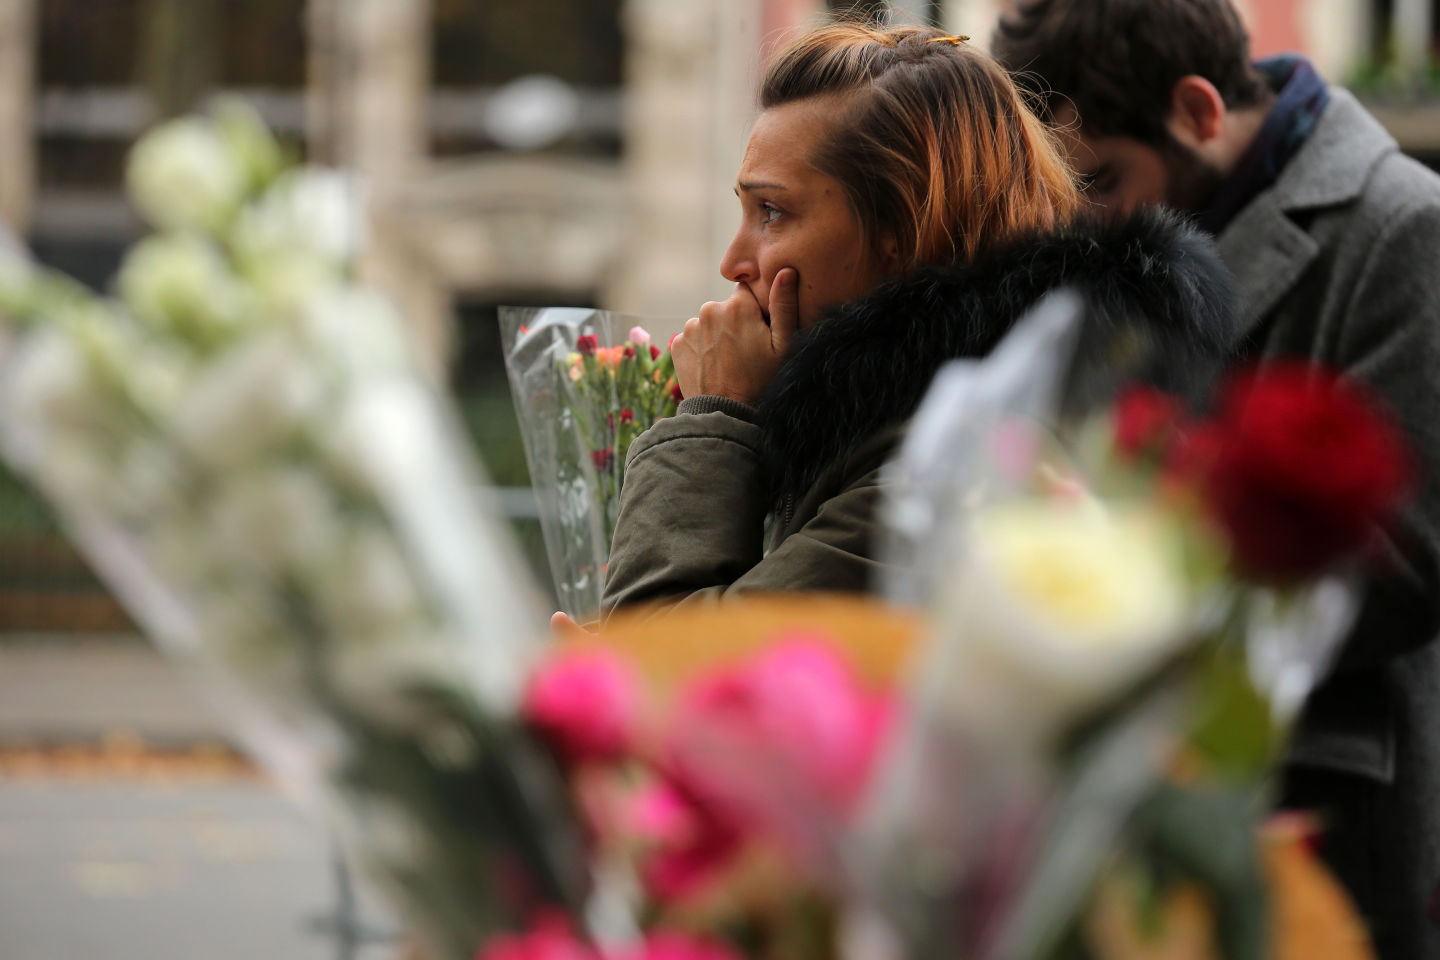  A woman reacts afetr placing flowers near the scene of yesterday's  Bataclan Theatre terrorist attack.  Christopher Furlong/Getty Images)